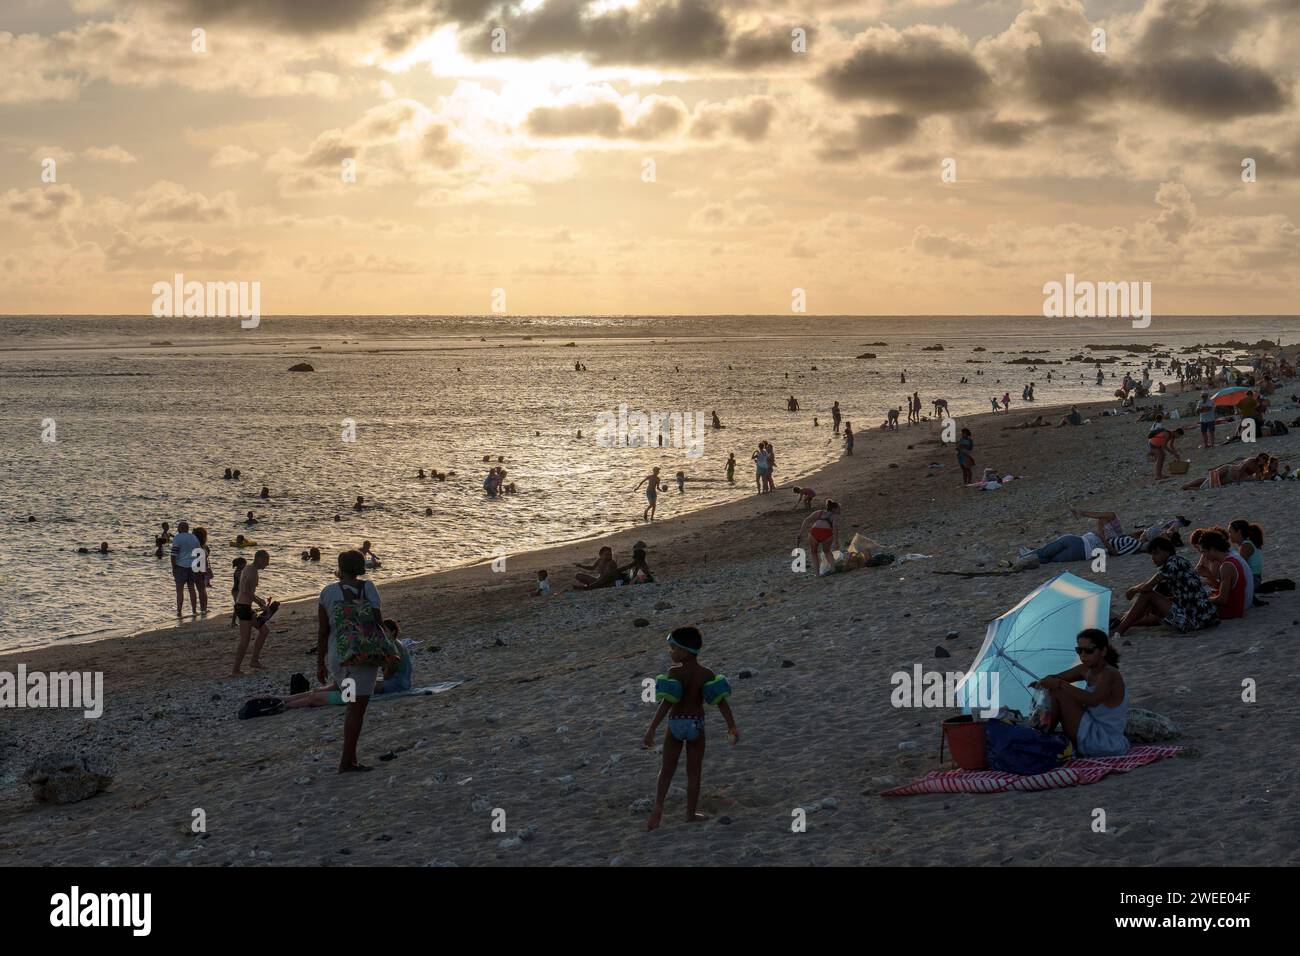 The beach at Saint-Pierre lagoon, Réunion Island, at sunset. Tourists, family and people enjoying the scenic view. It's a popular travel destination Stock Photo